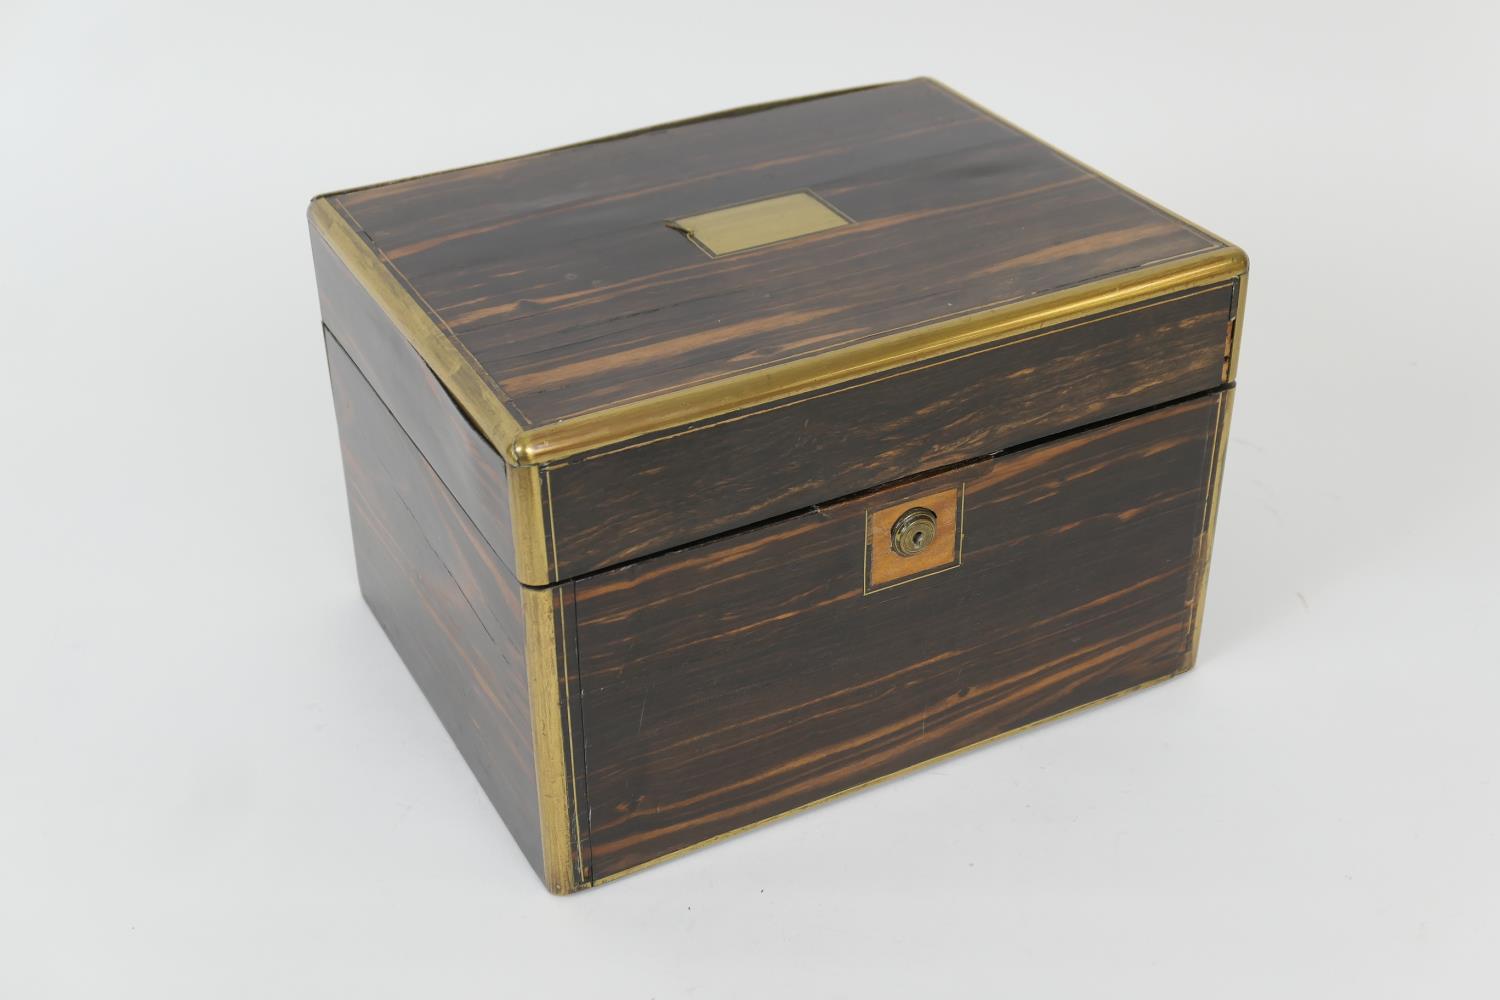 Victorian coromandel vanity box, brass edging, opening to reveal a full complement of glass - Image 2 of 2